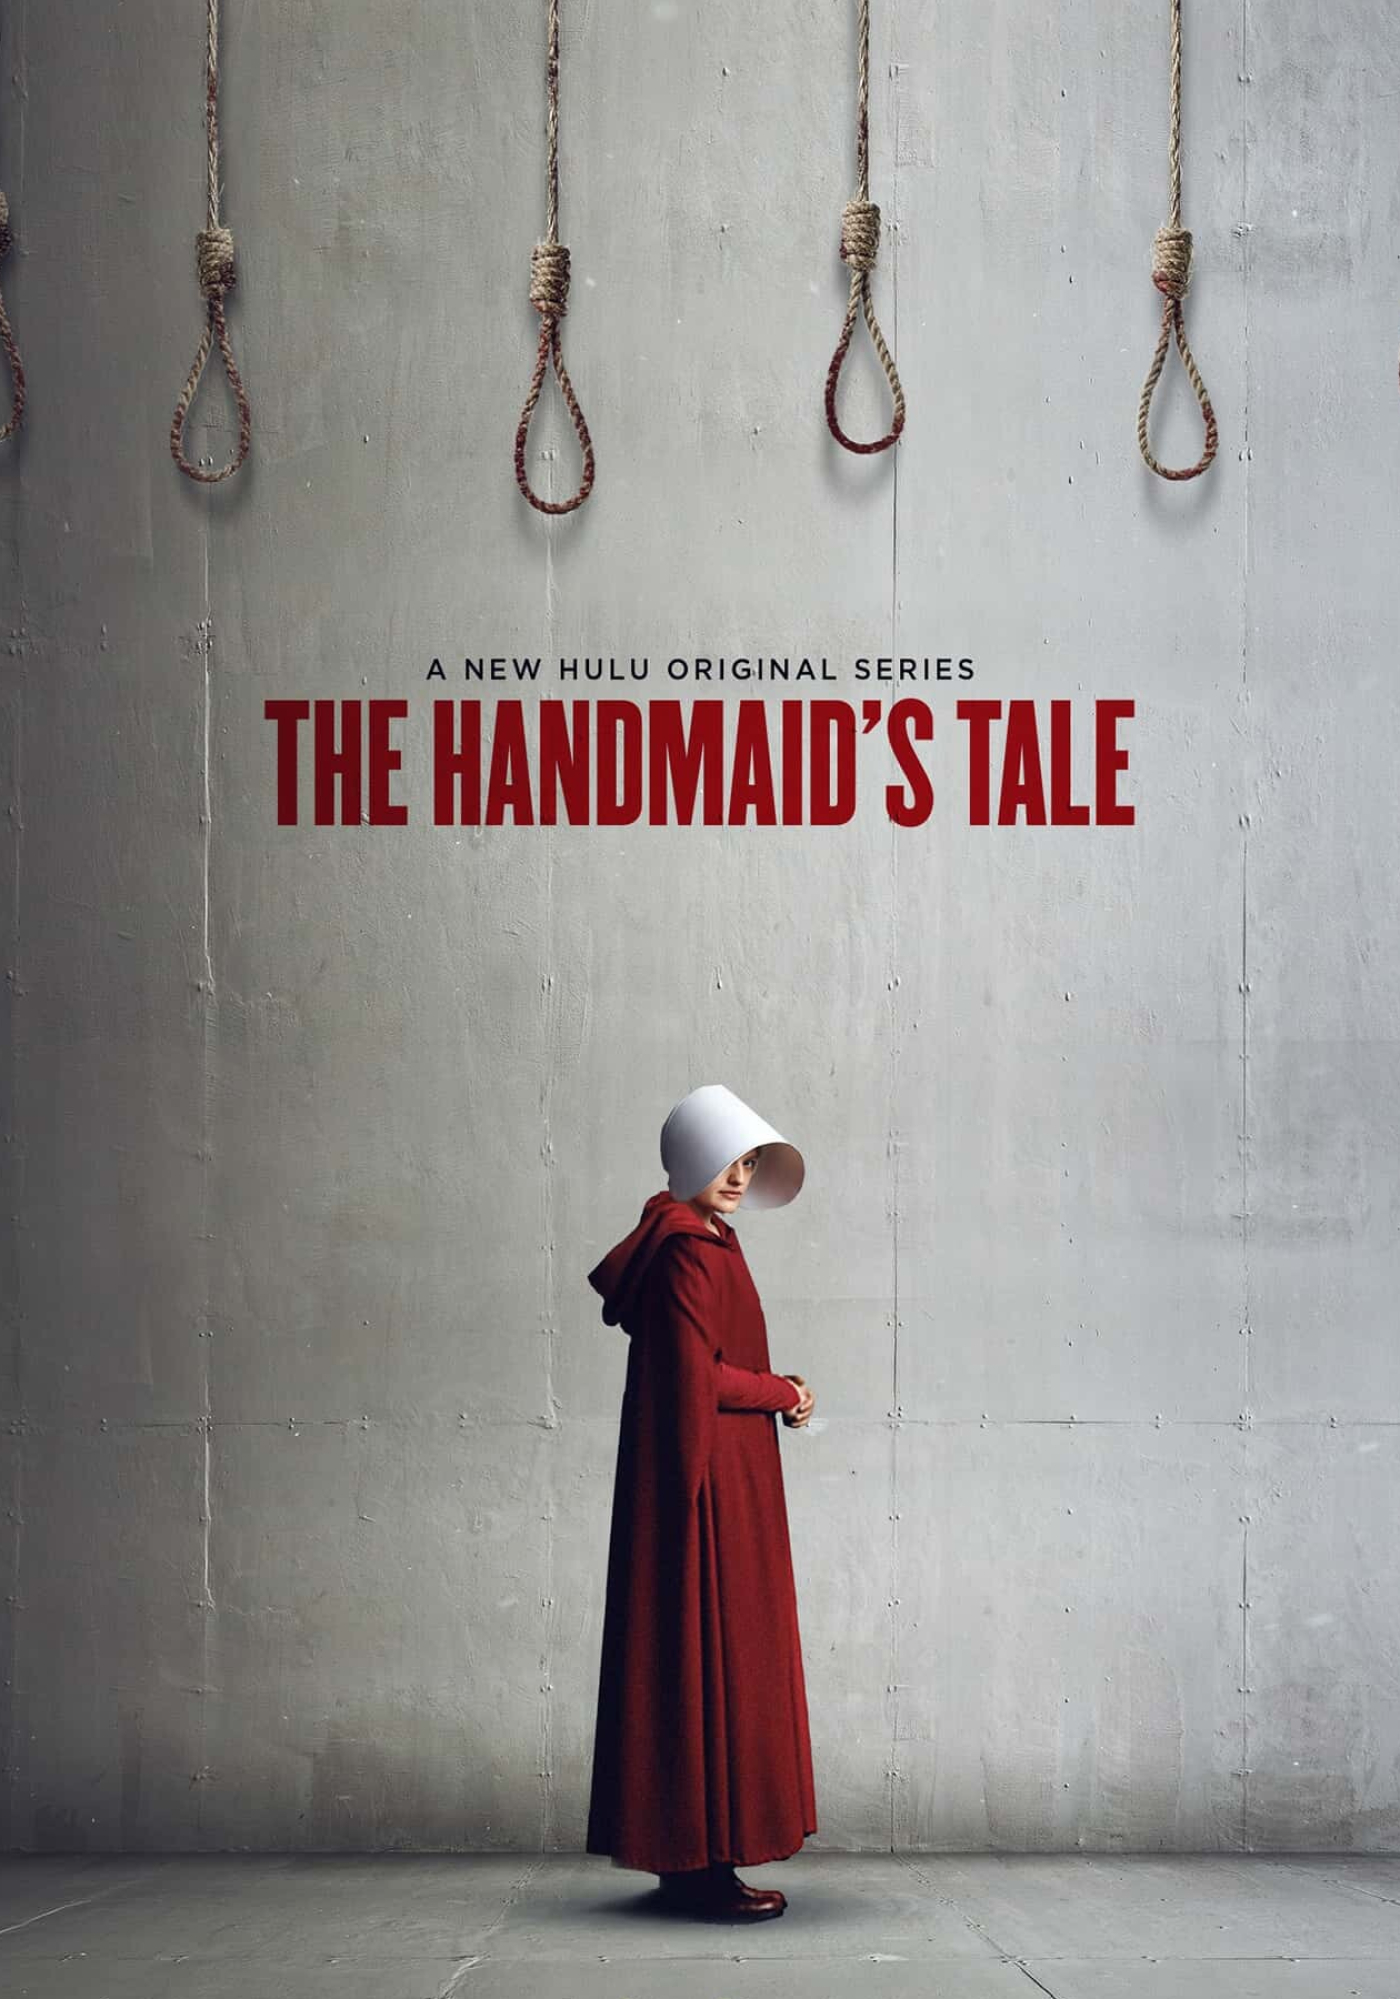 The Handmaid's Tale: TV series based on the best-selling novel by Margaret Atwood. 1400x2000 HD Wallpaper.